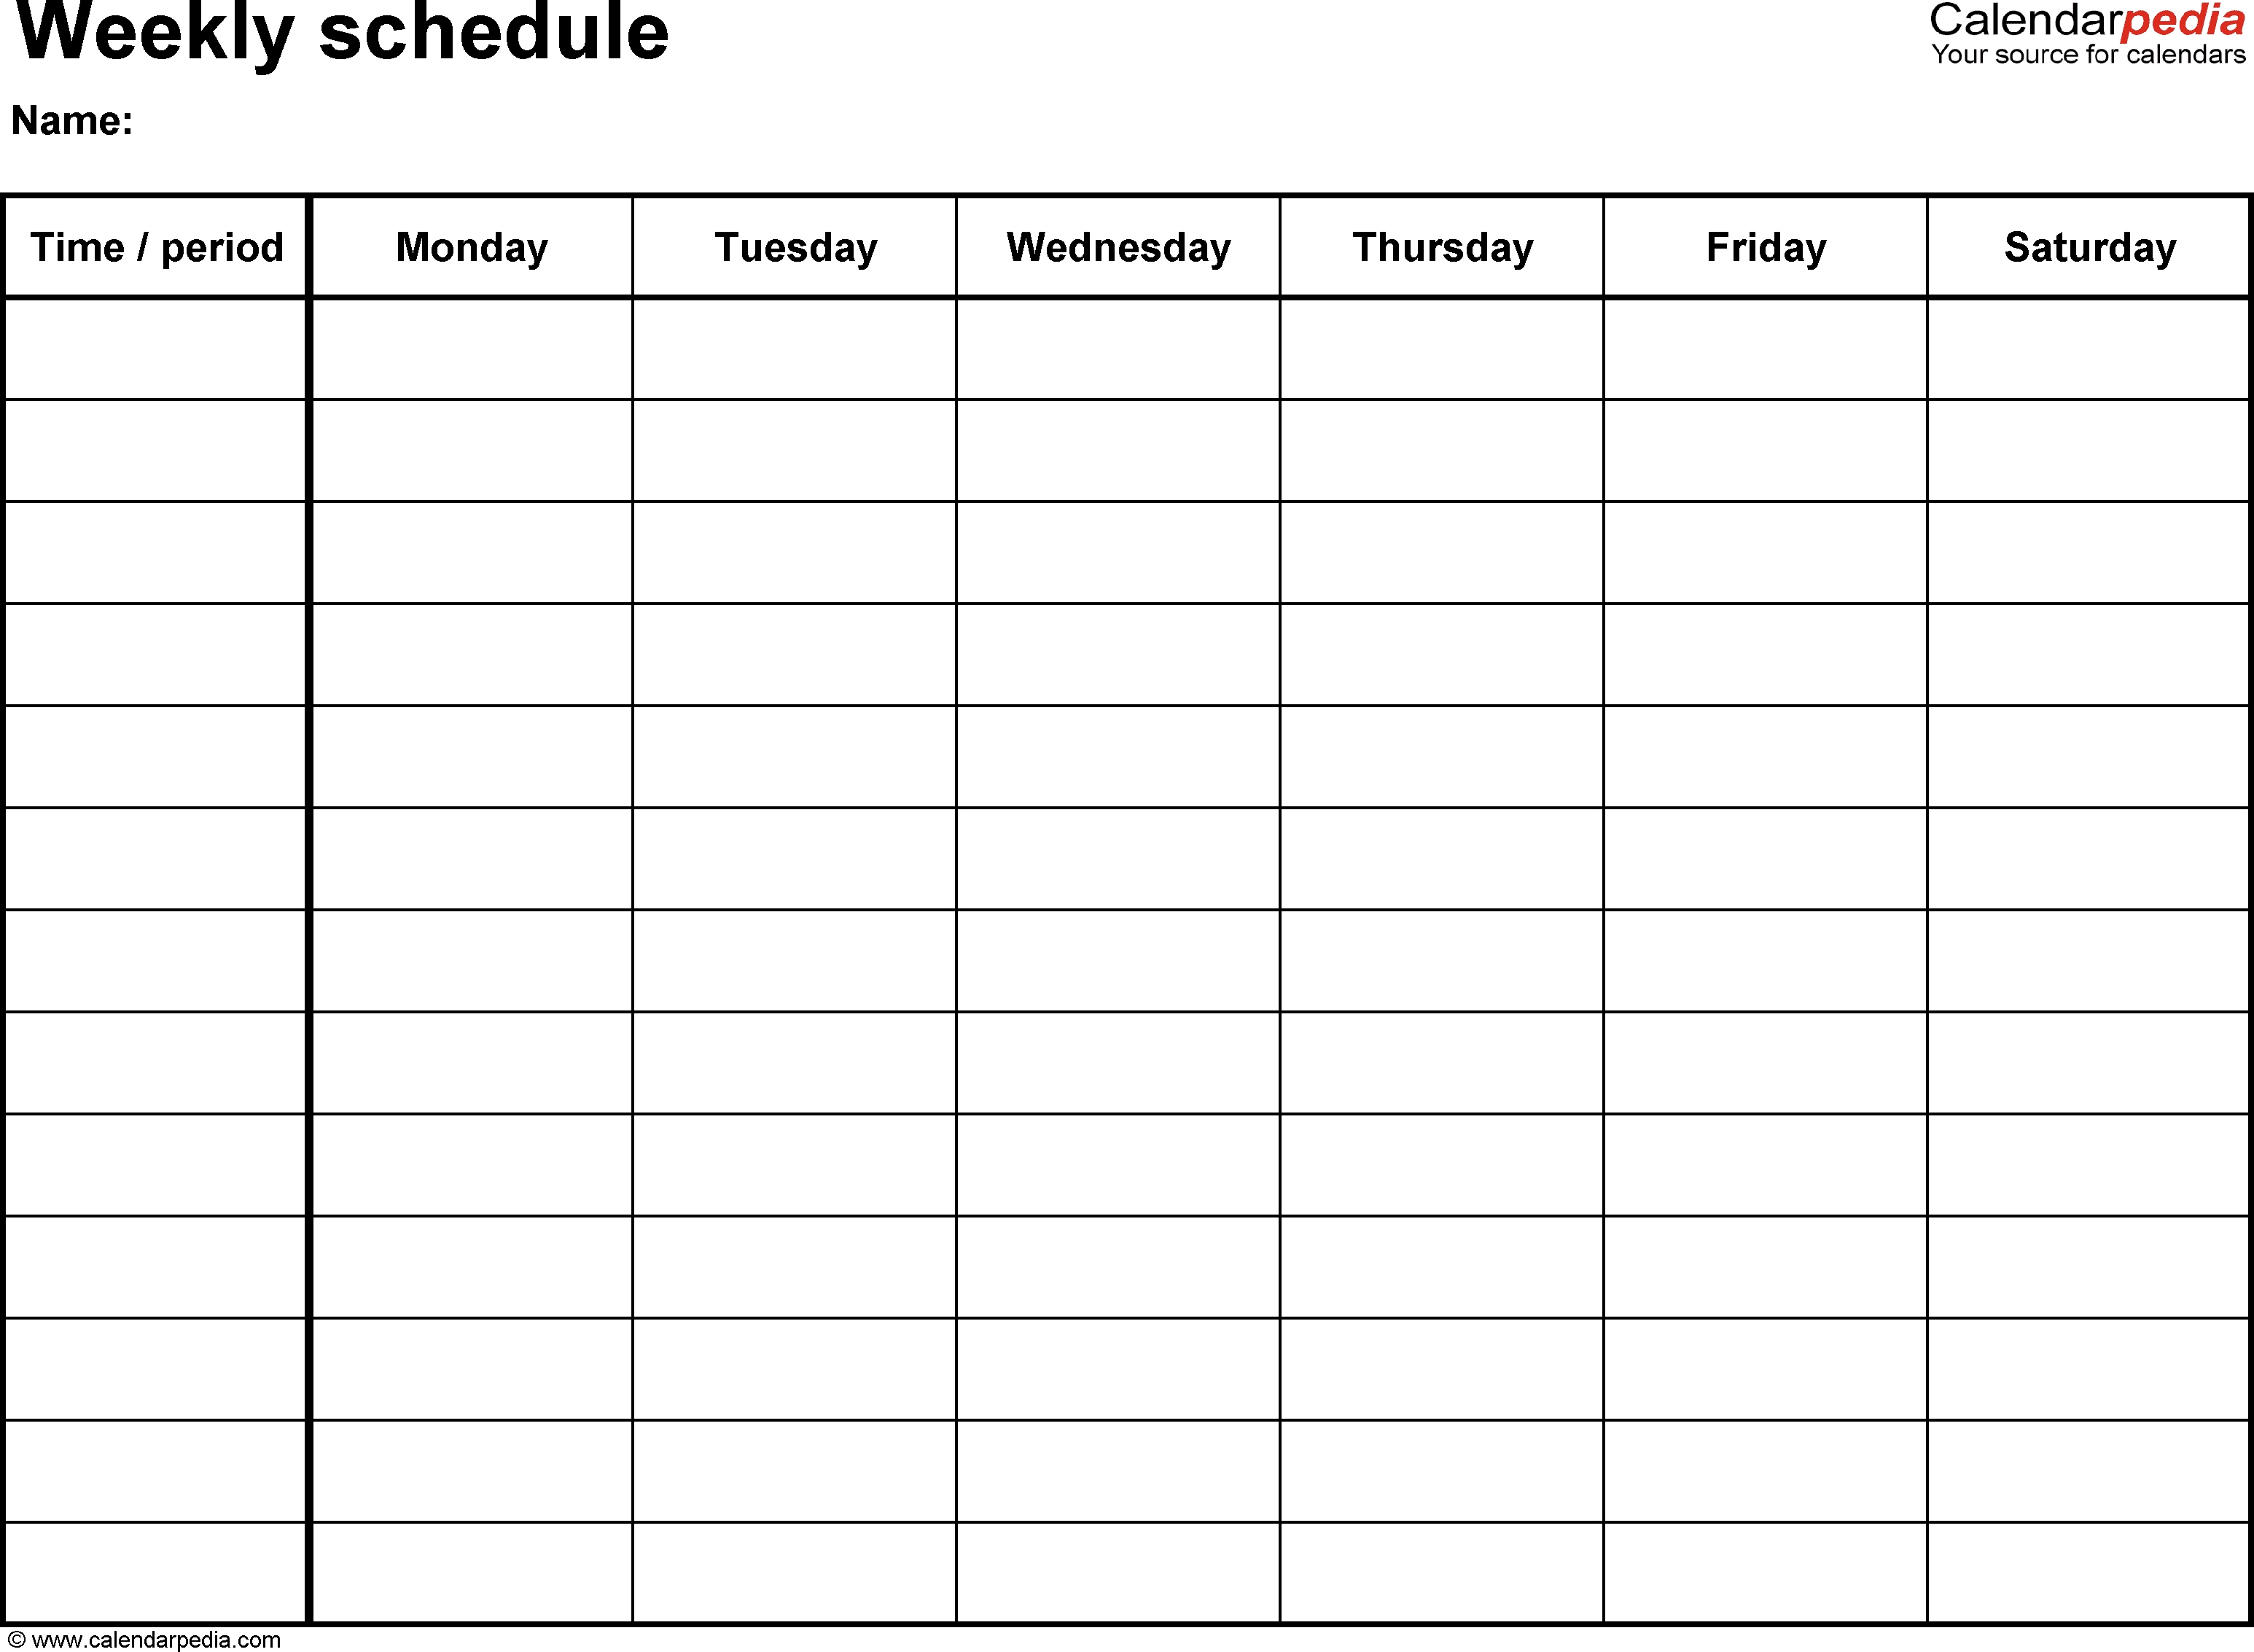 Free Weekly Schedule Templates For Excel - 18 Templates 5 Day Week Calendar Template Excel